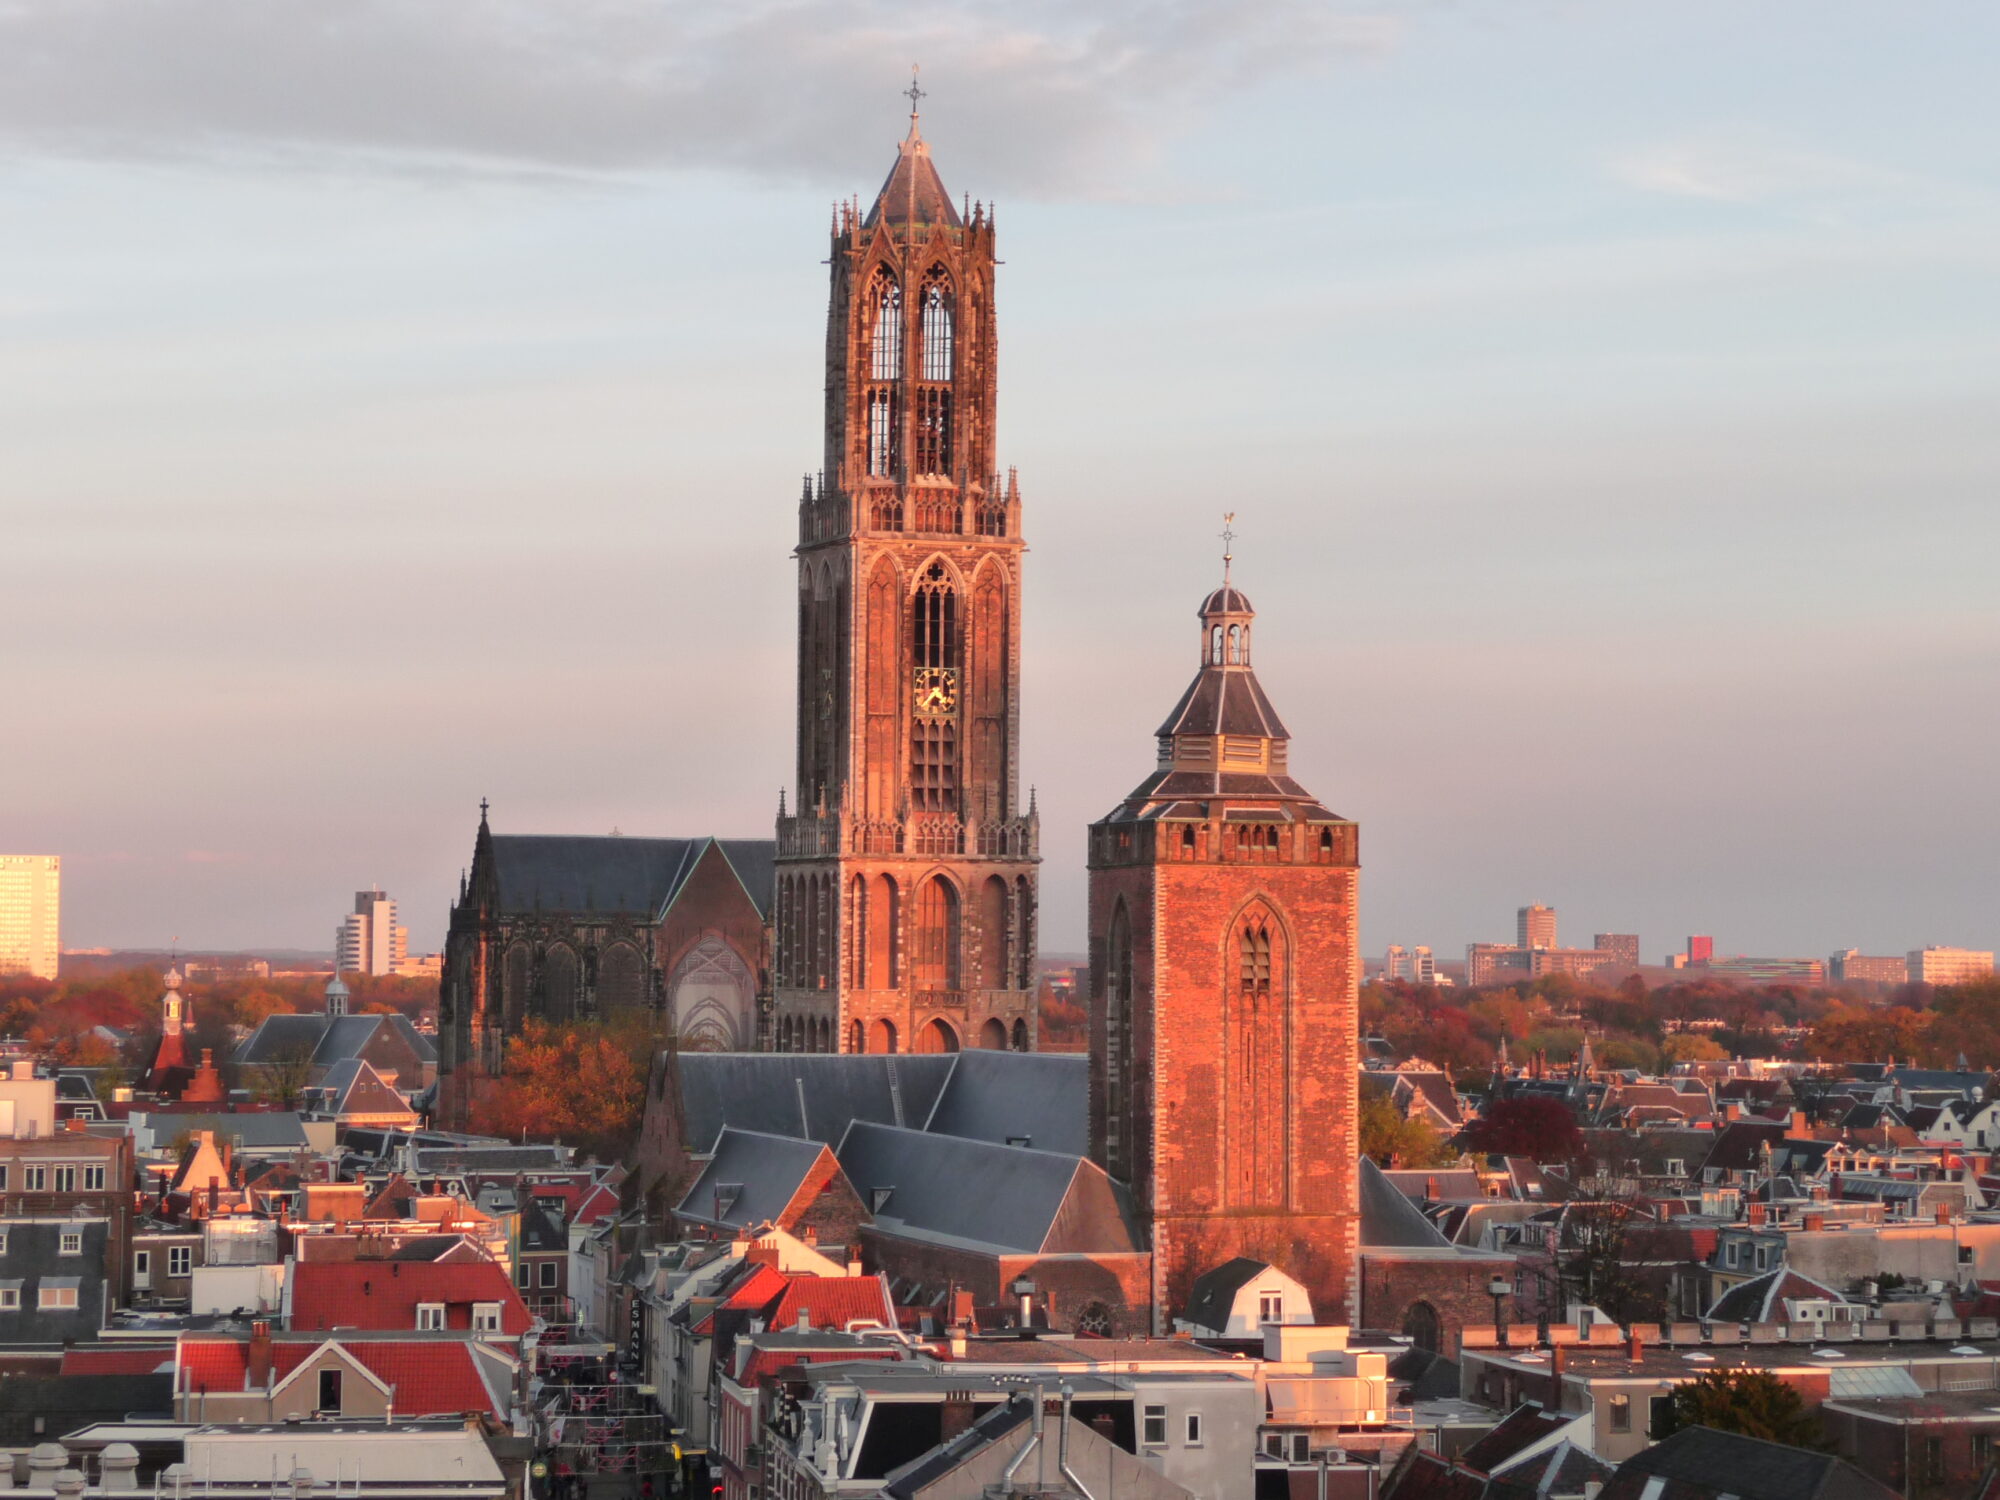 The province of Utrecht has the ambition to accelerate the transition to a circular economy.